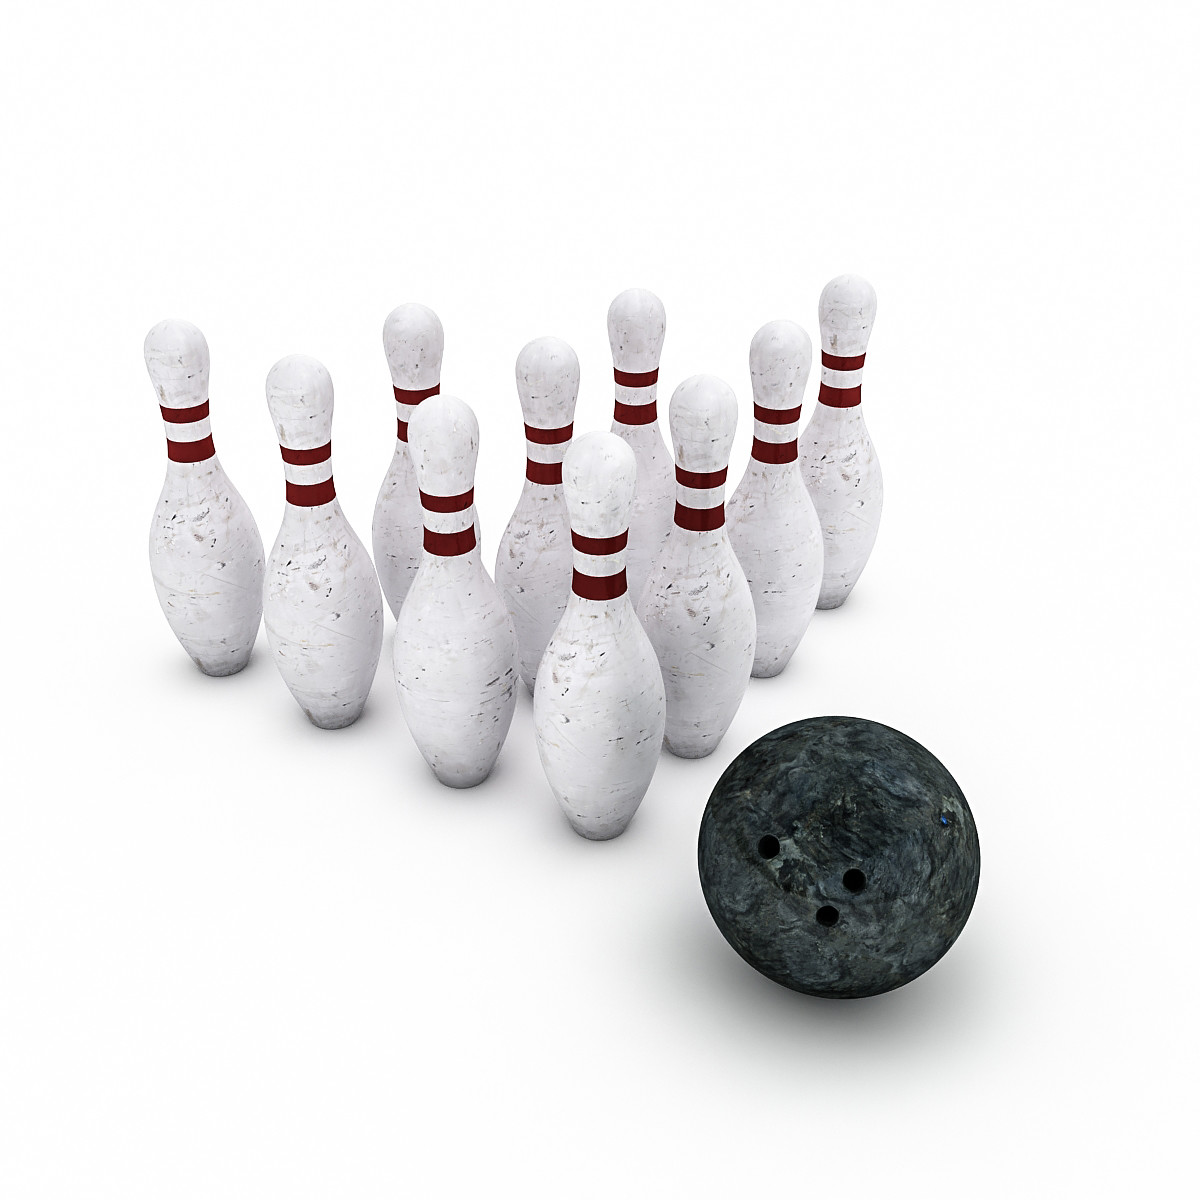 Bowling Ball & Pin Model can be an impressive element for your projects...